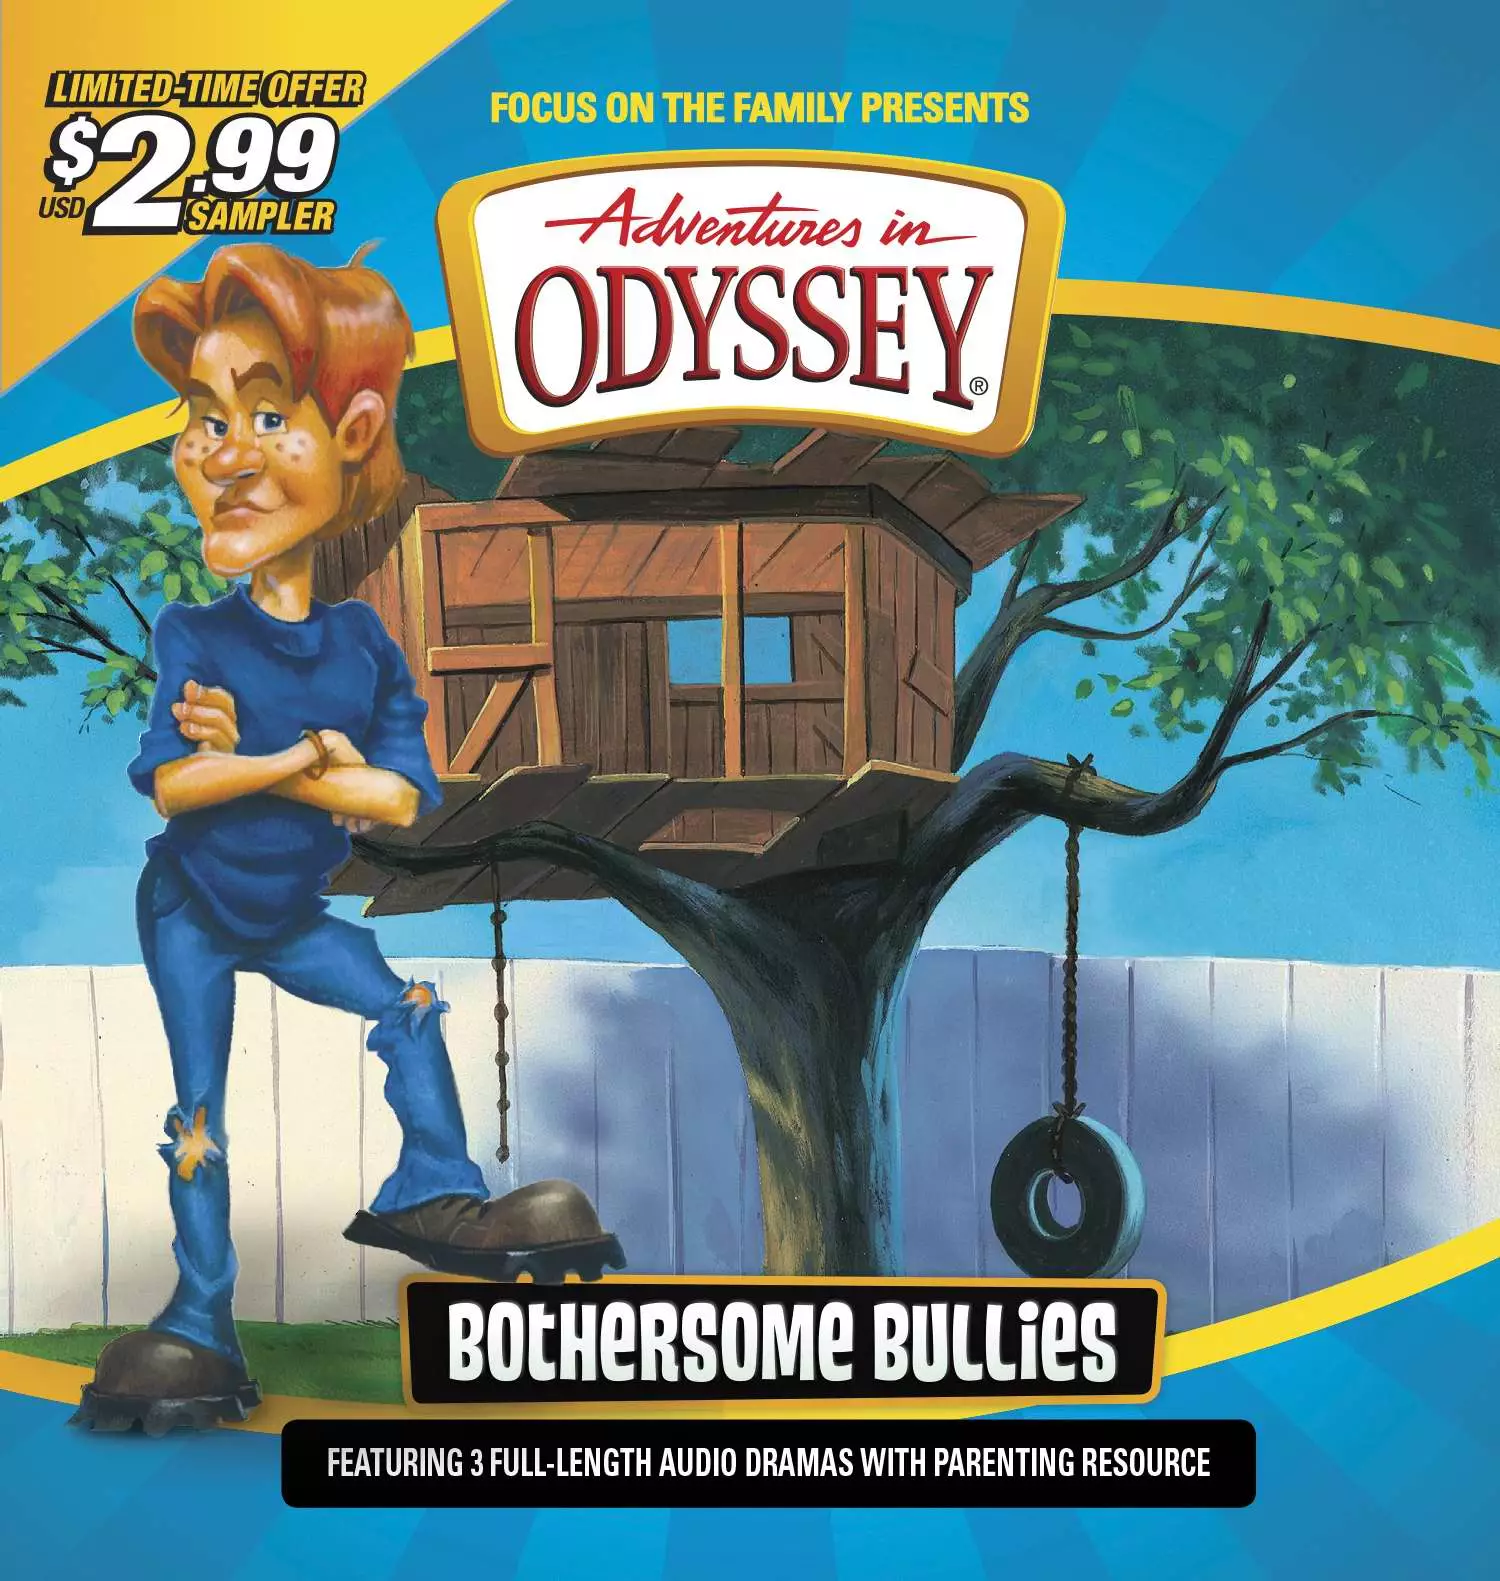 Bothersome Bullies CD